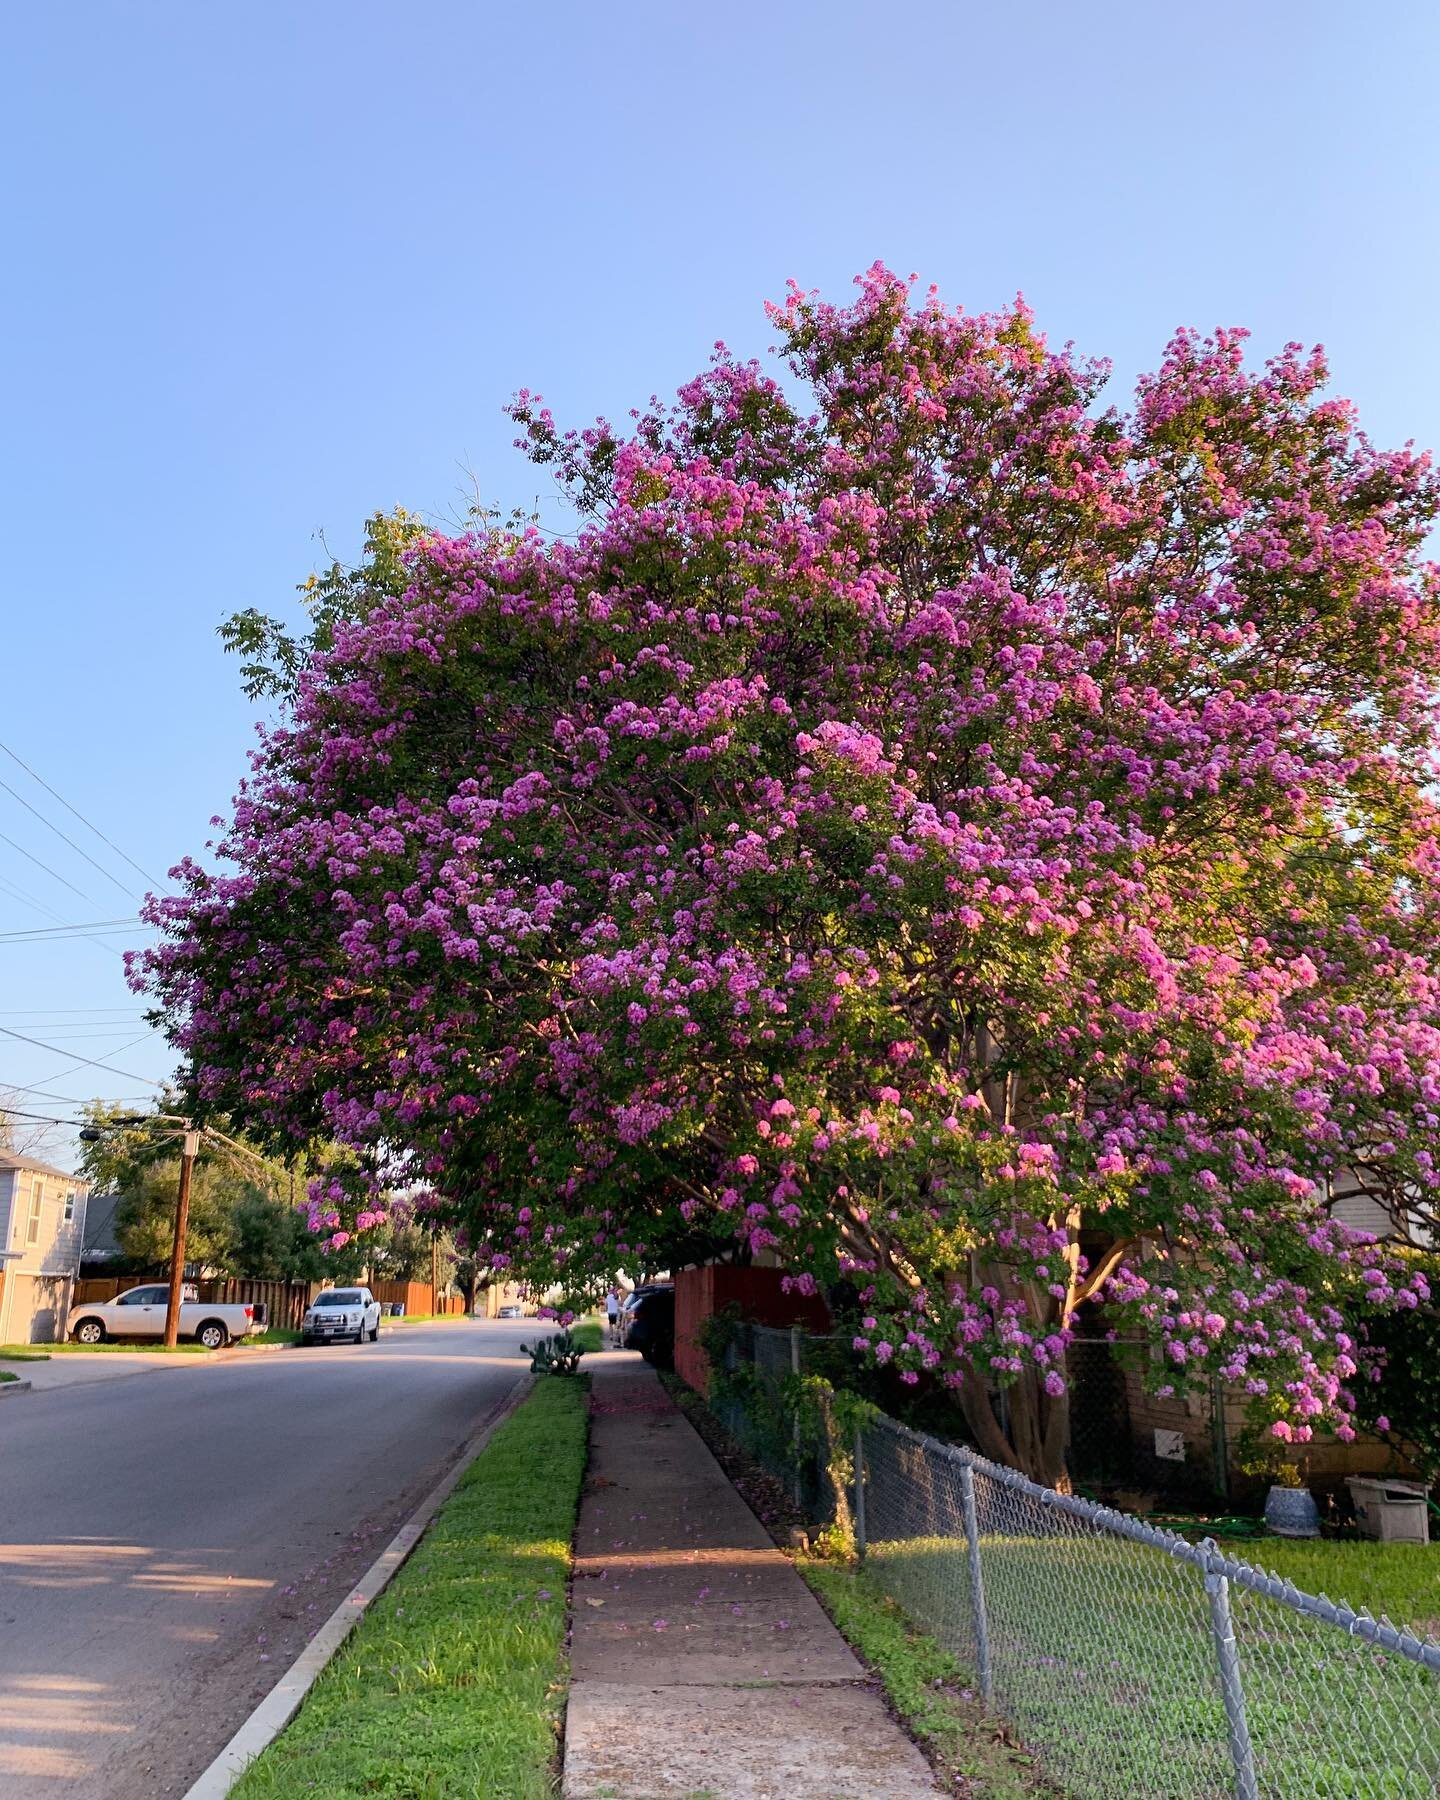 Coveting my neighbors&rsquo; crepe myrtles